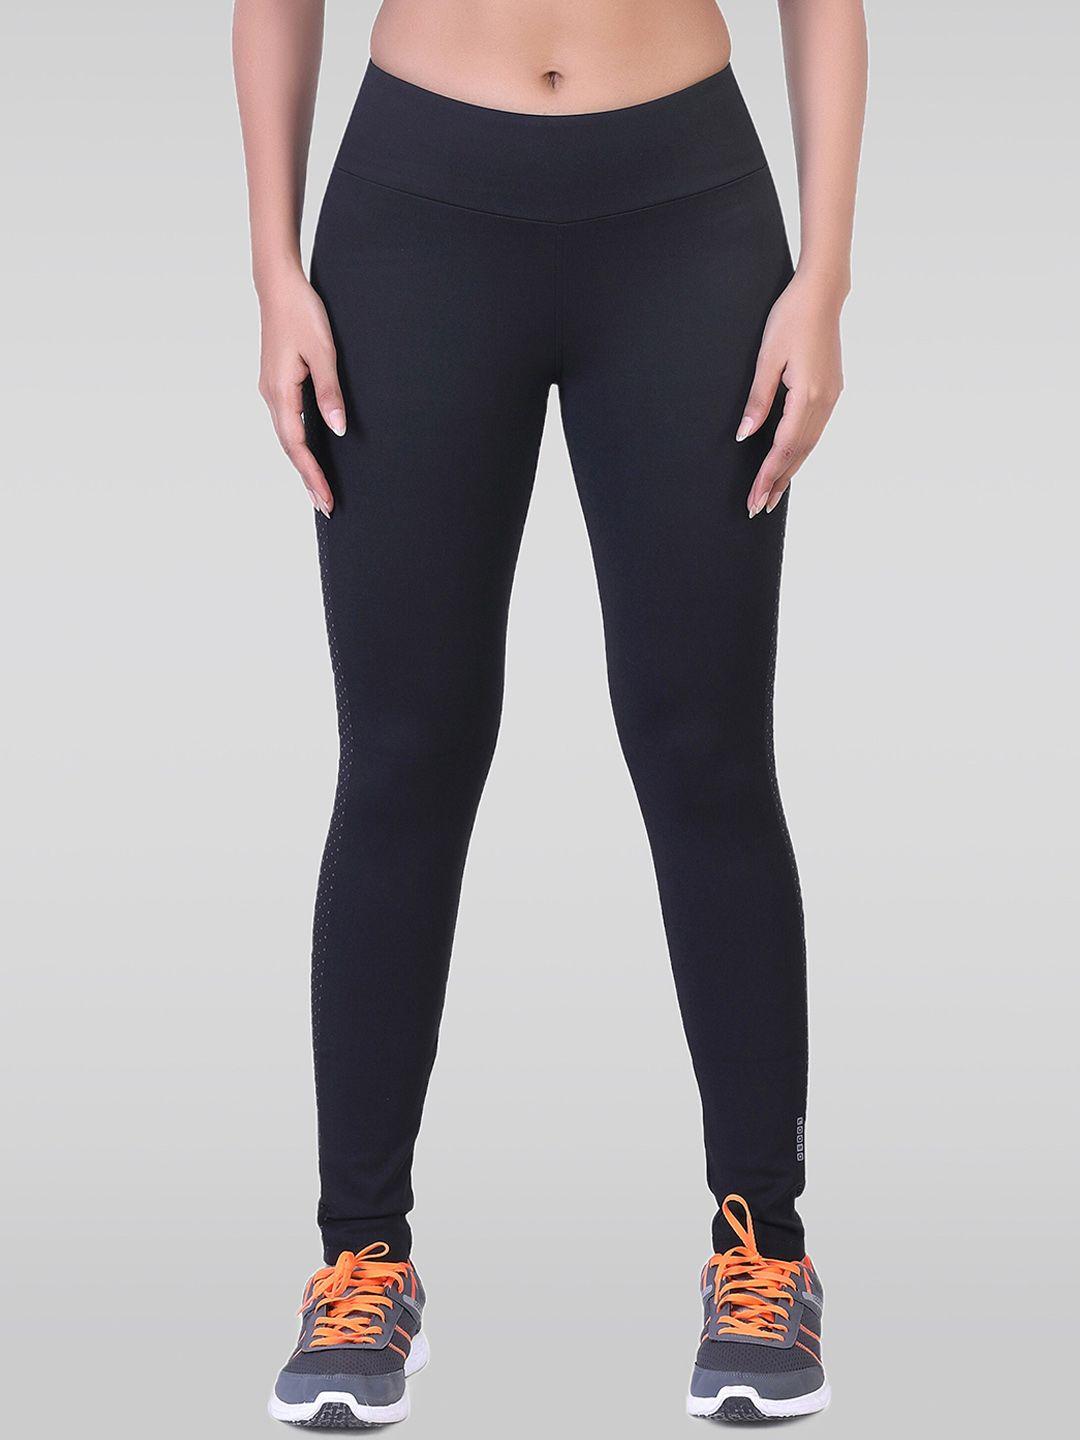 laasa--sports-women-dry-fit-ankle-length-gym-tights